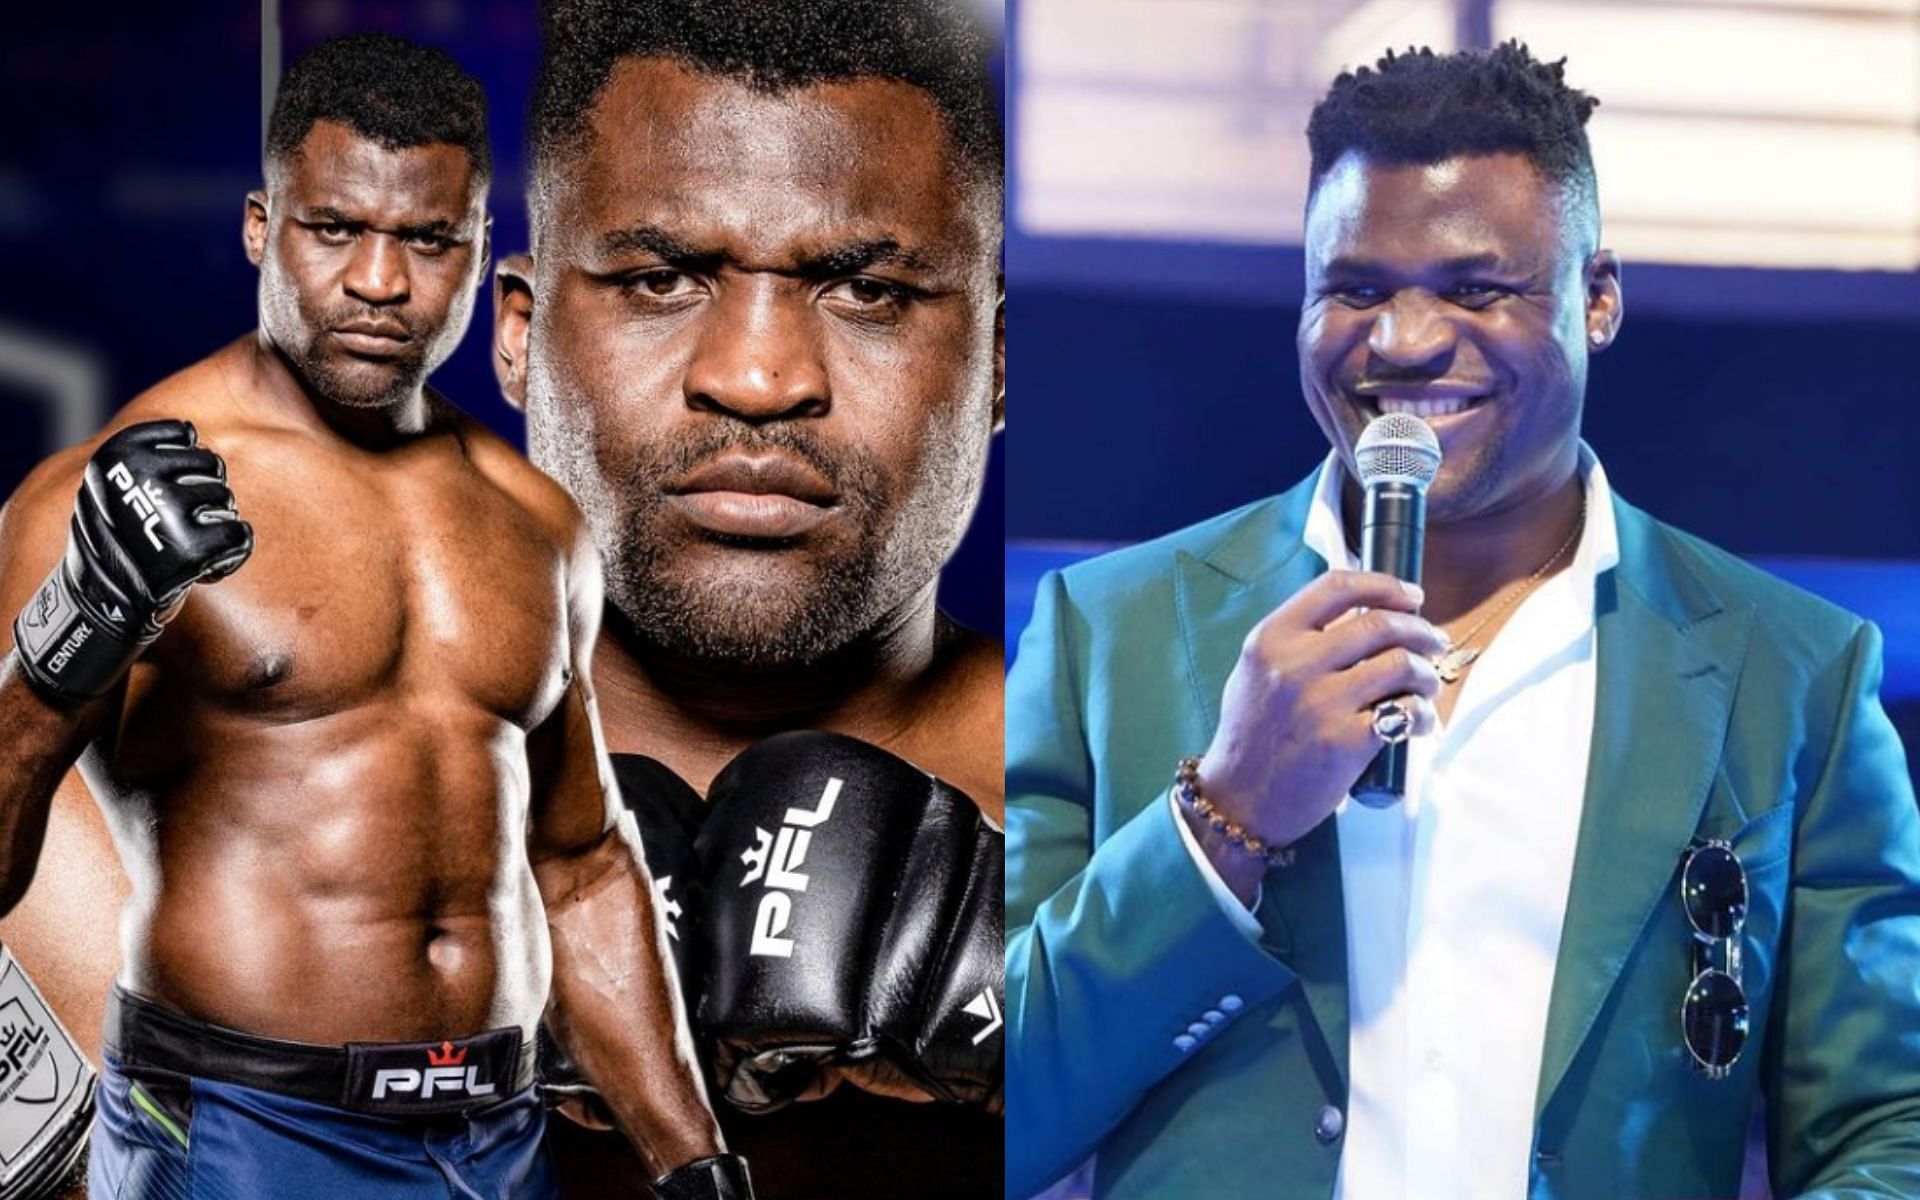 Francis Ngannou reveals he will earn more for PFL debut than entire UFC career